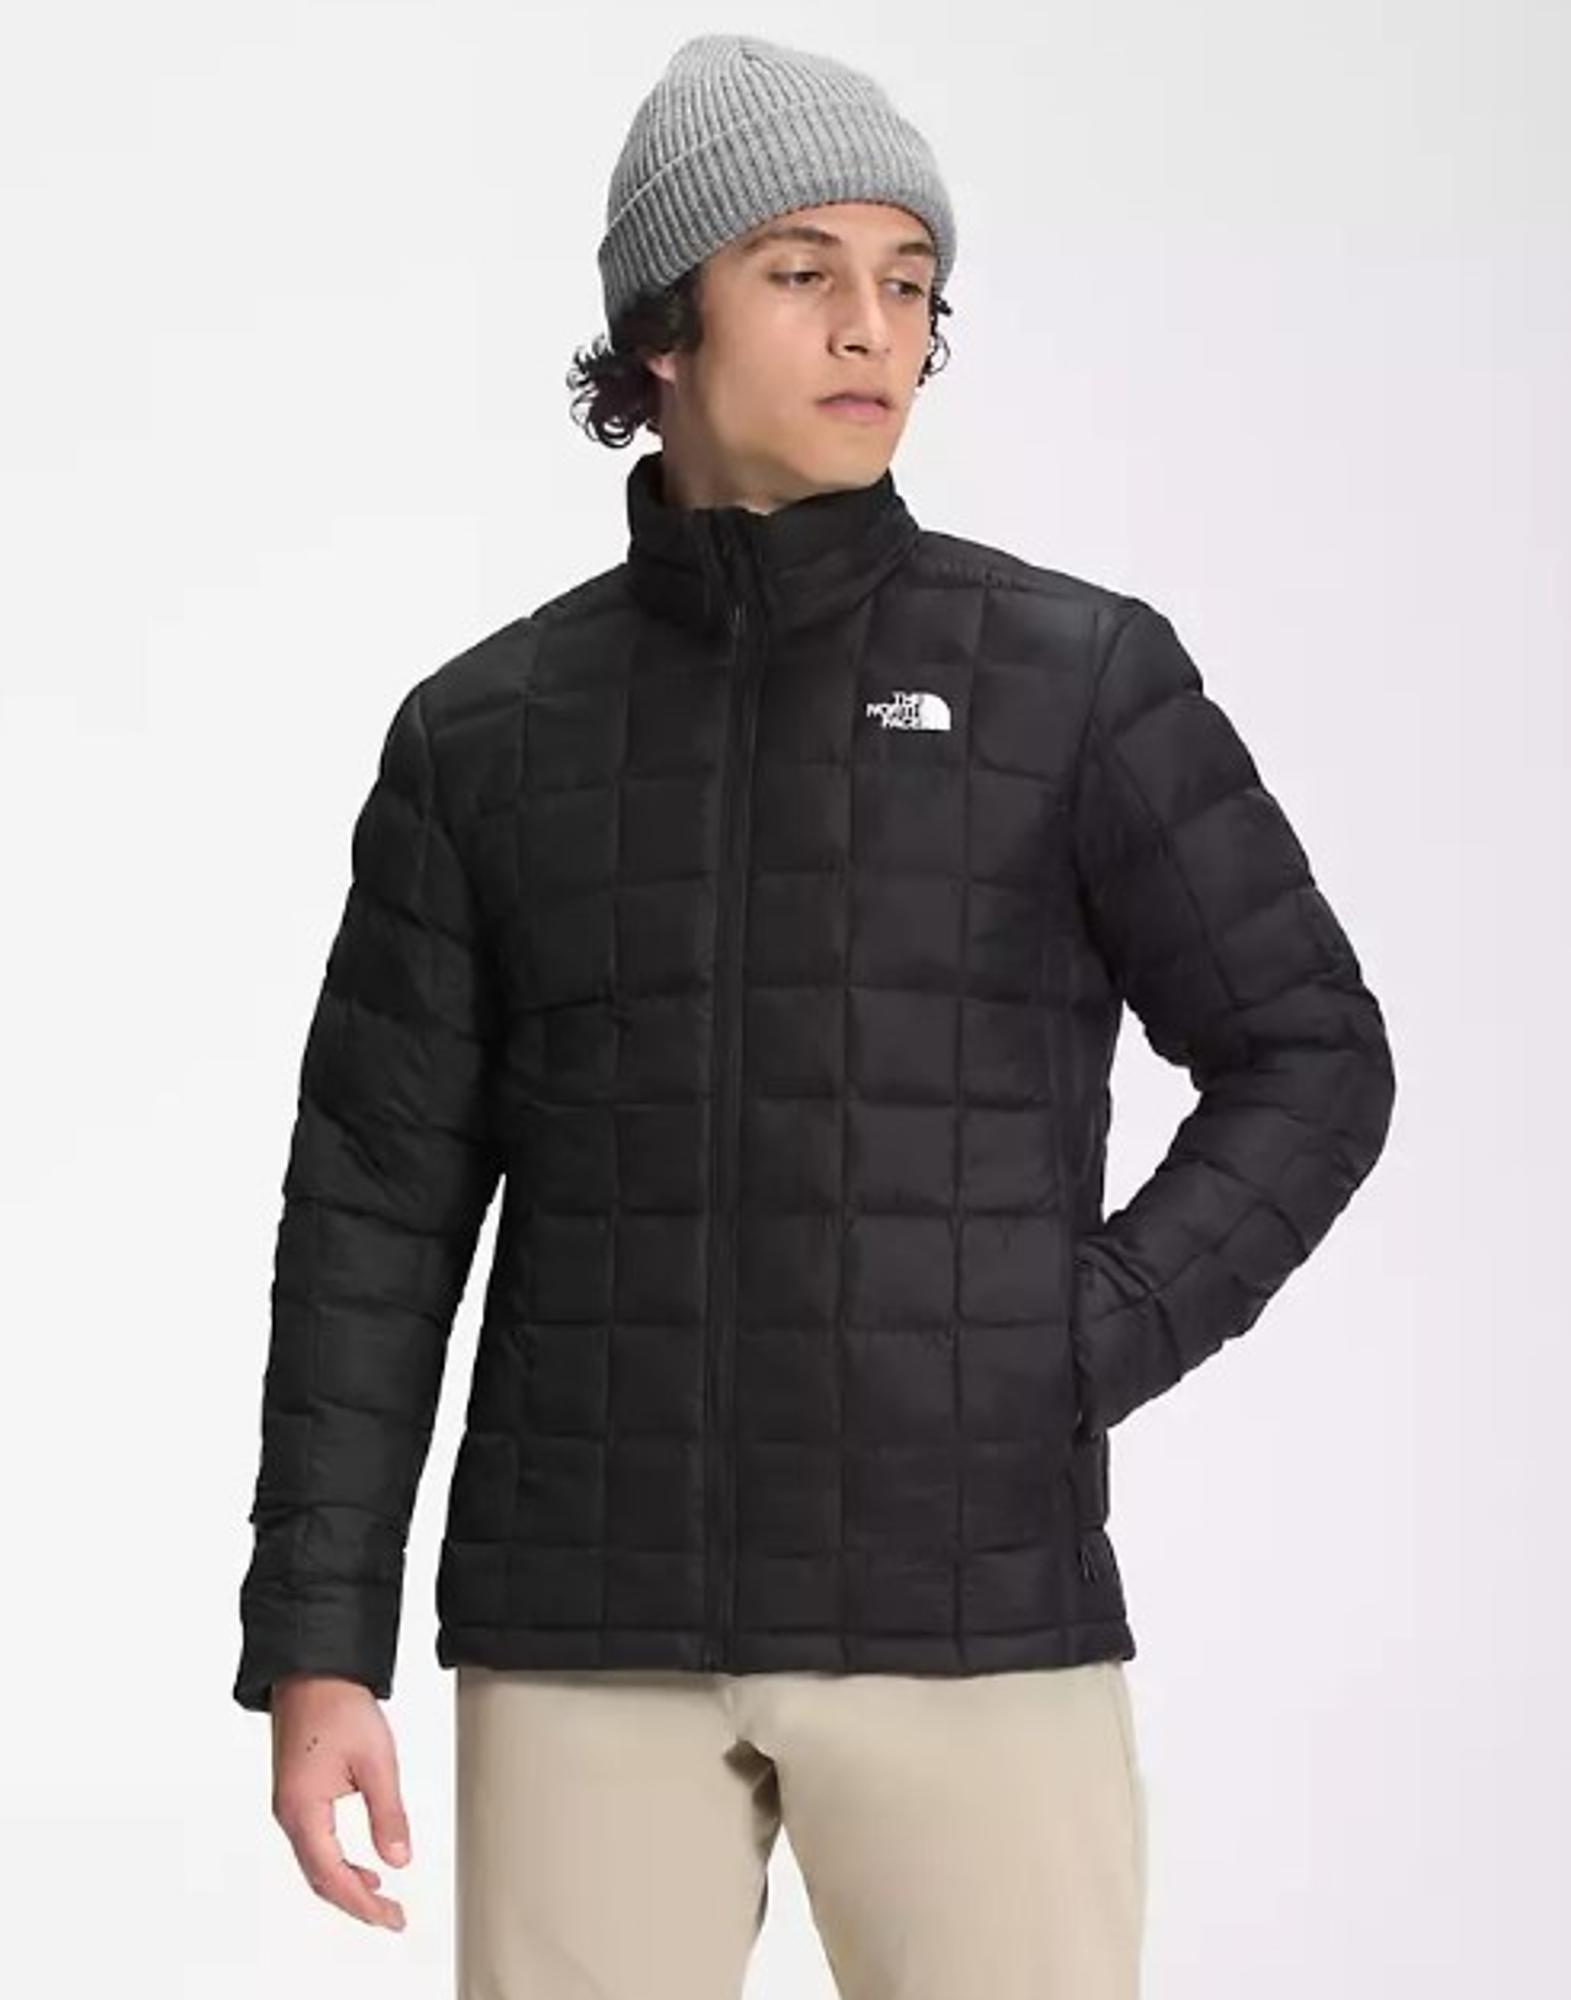 Men's Thermoball Eco Jacket 2.0